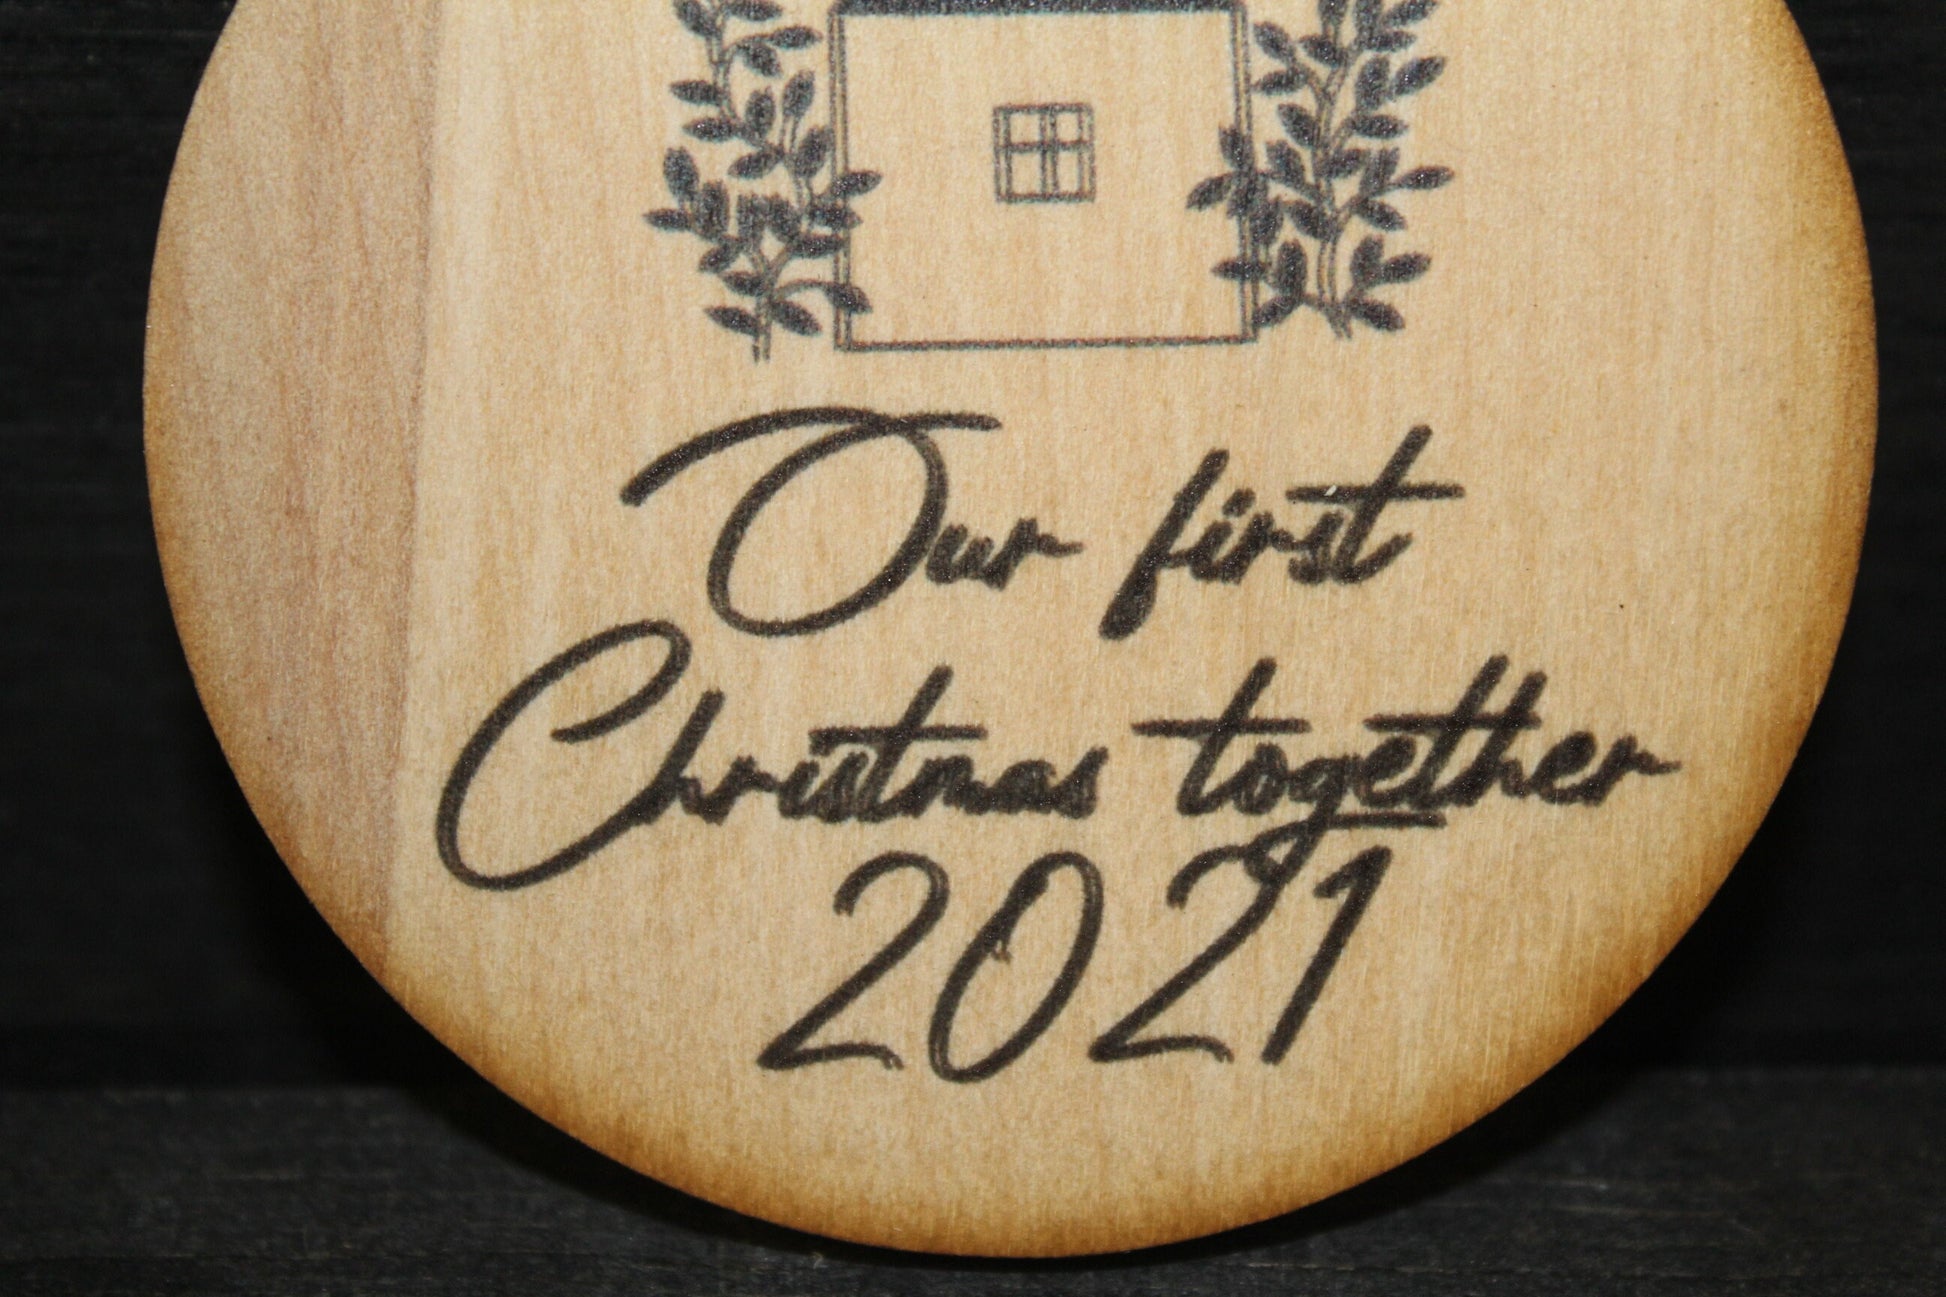 Our First Christmas Together 2021 Homeowners Newly Weds Couples Christmas Ornament Key Chain Gift Woodslice Handmade Housewarming Wedding